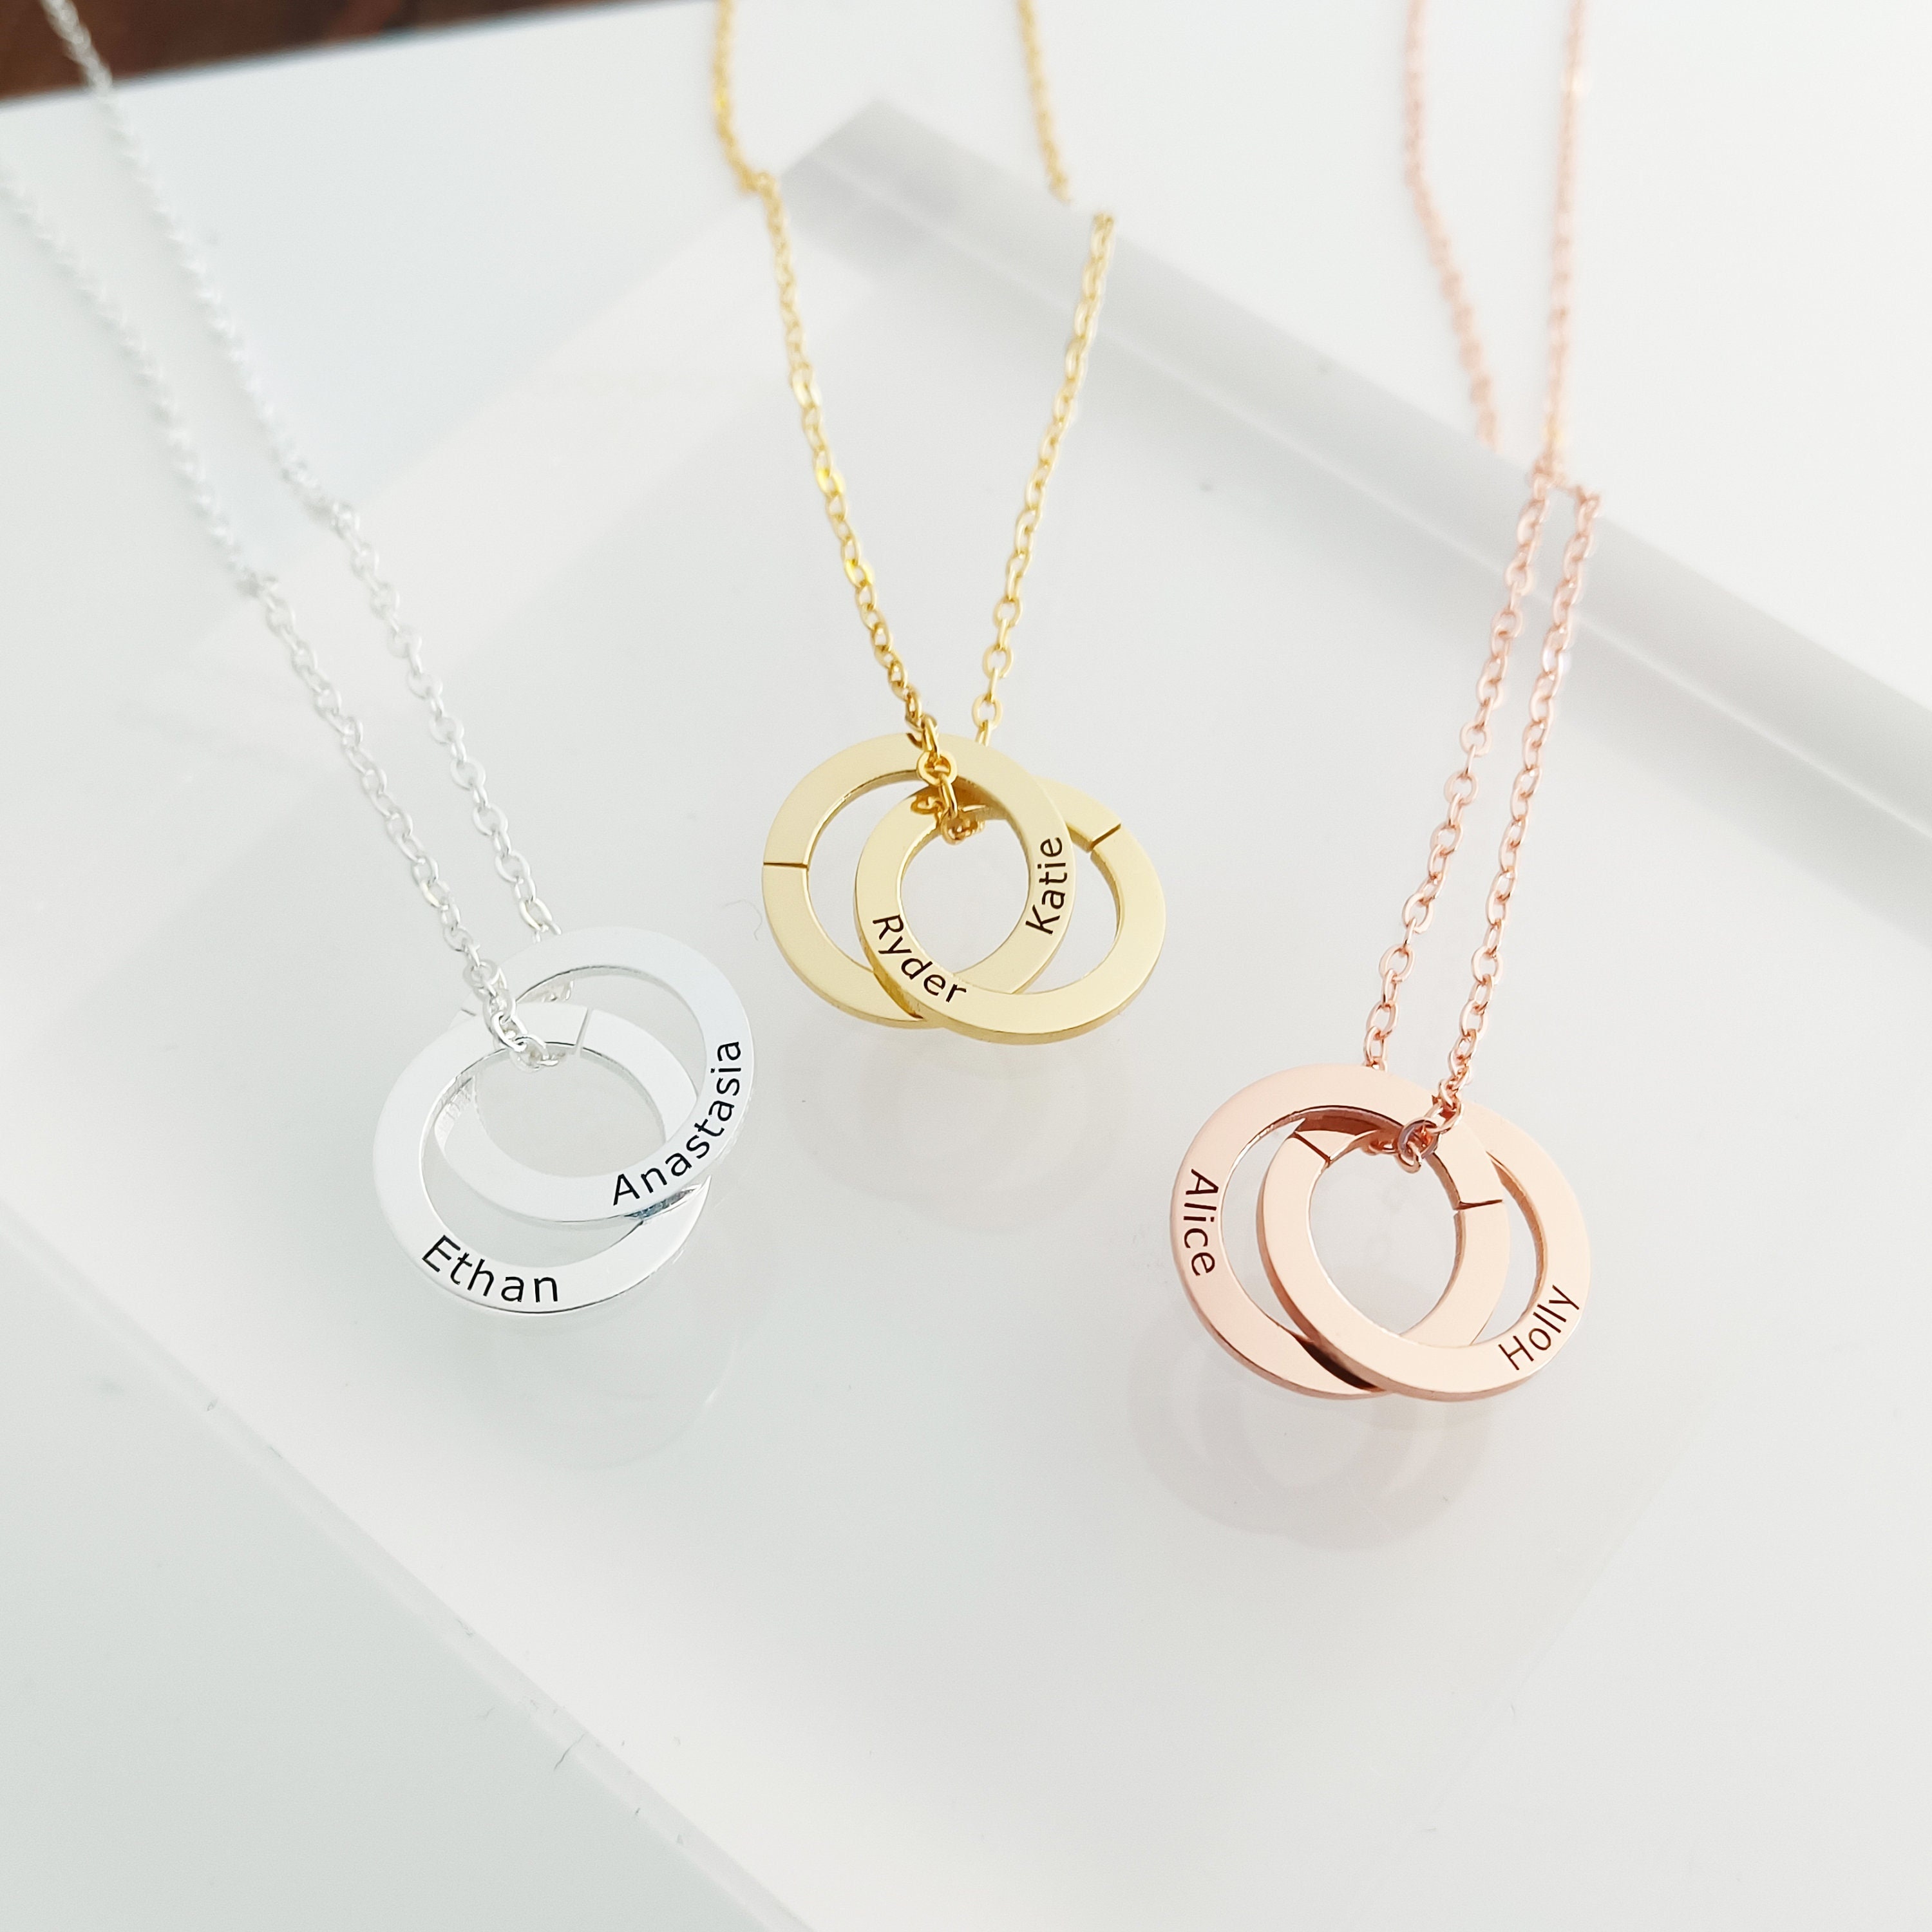 Customized Stainless Steel Circle Necklaces for Women Personalized Name Pendant  Necklace Jewelry Valentine's Day Birthday Gift